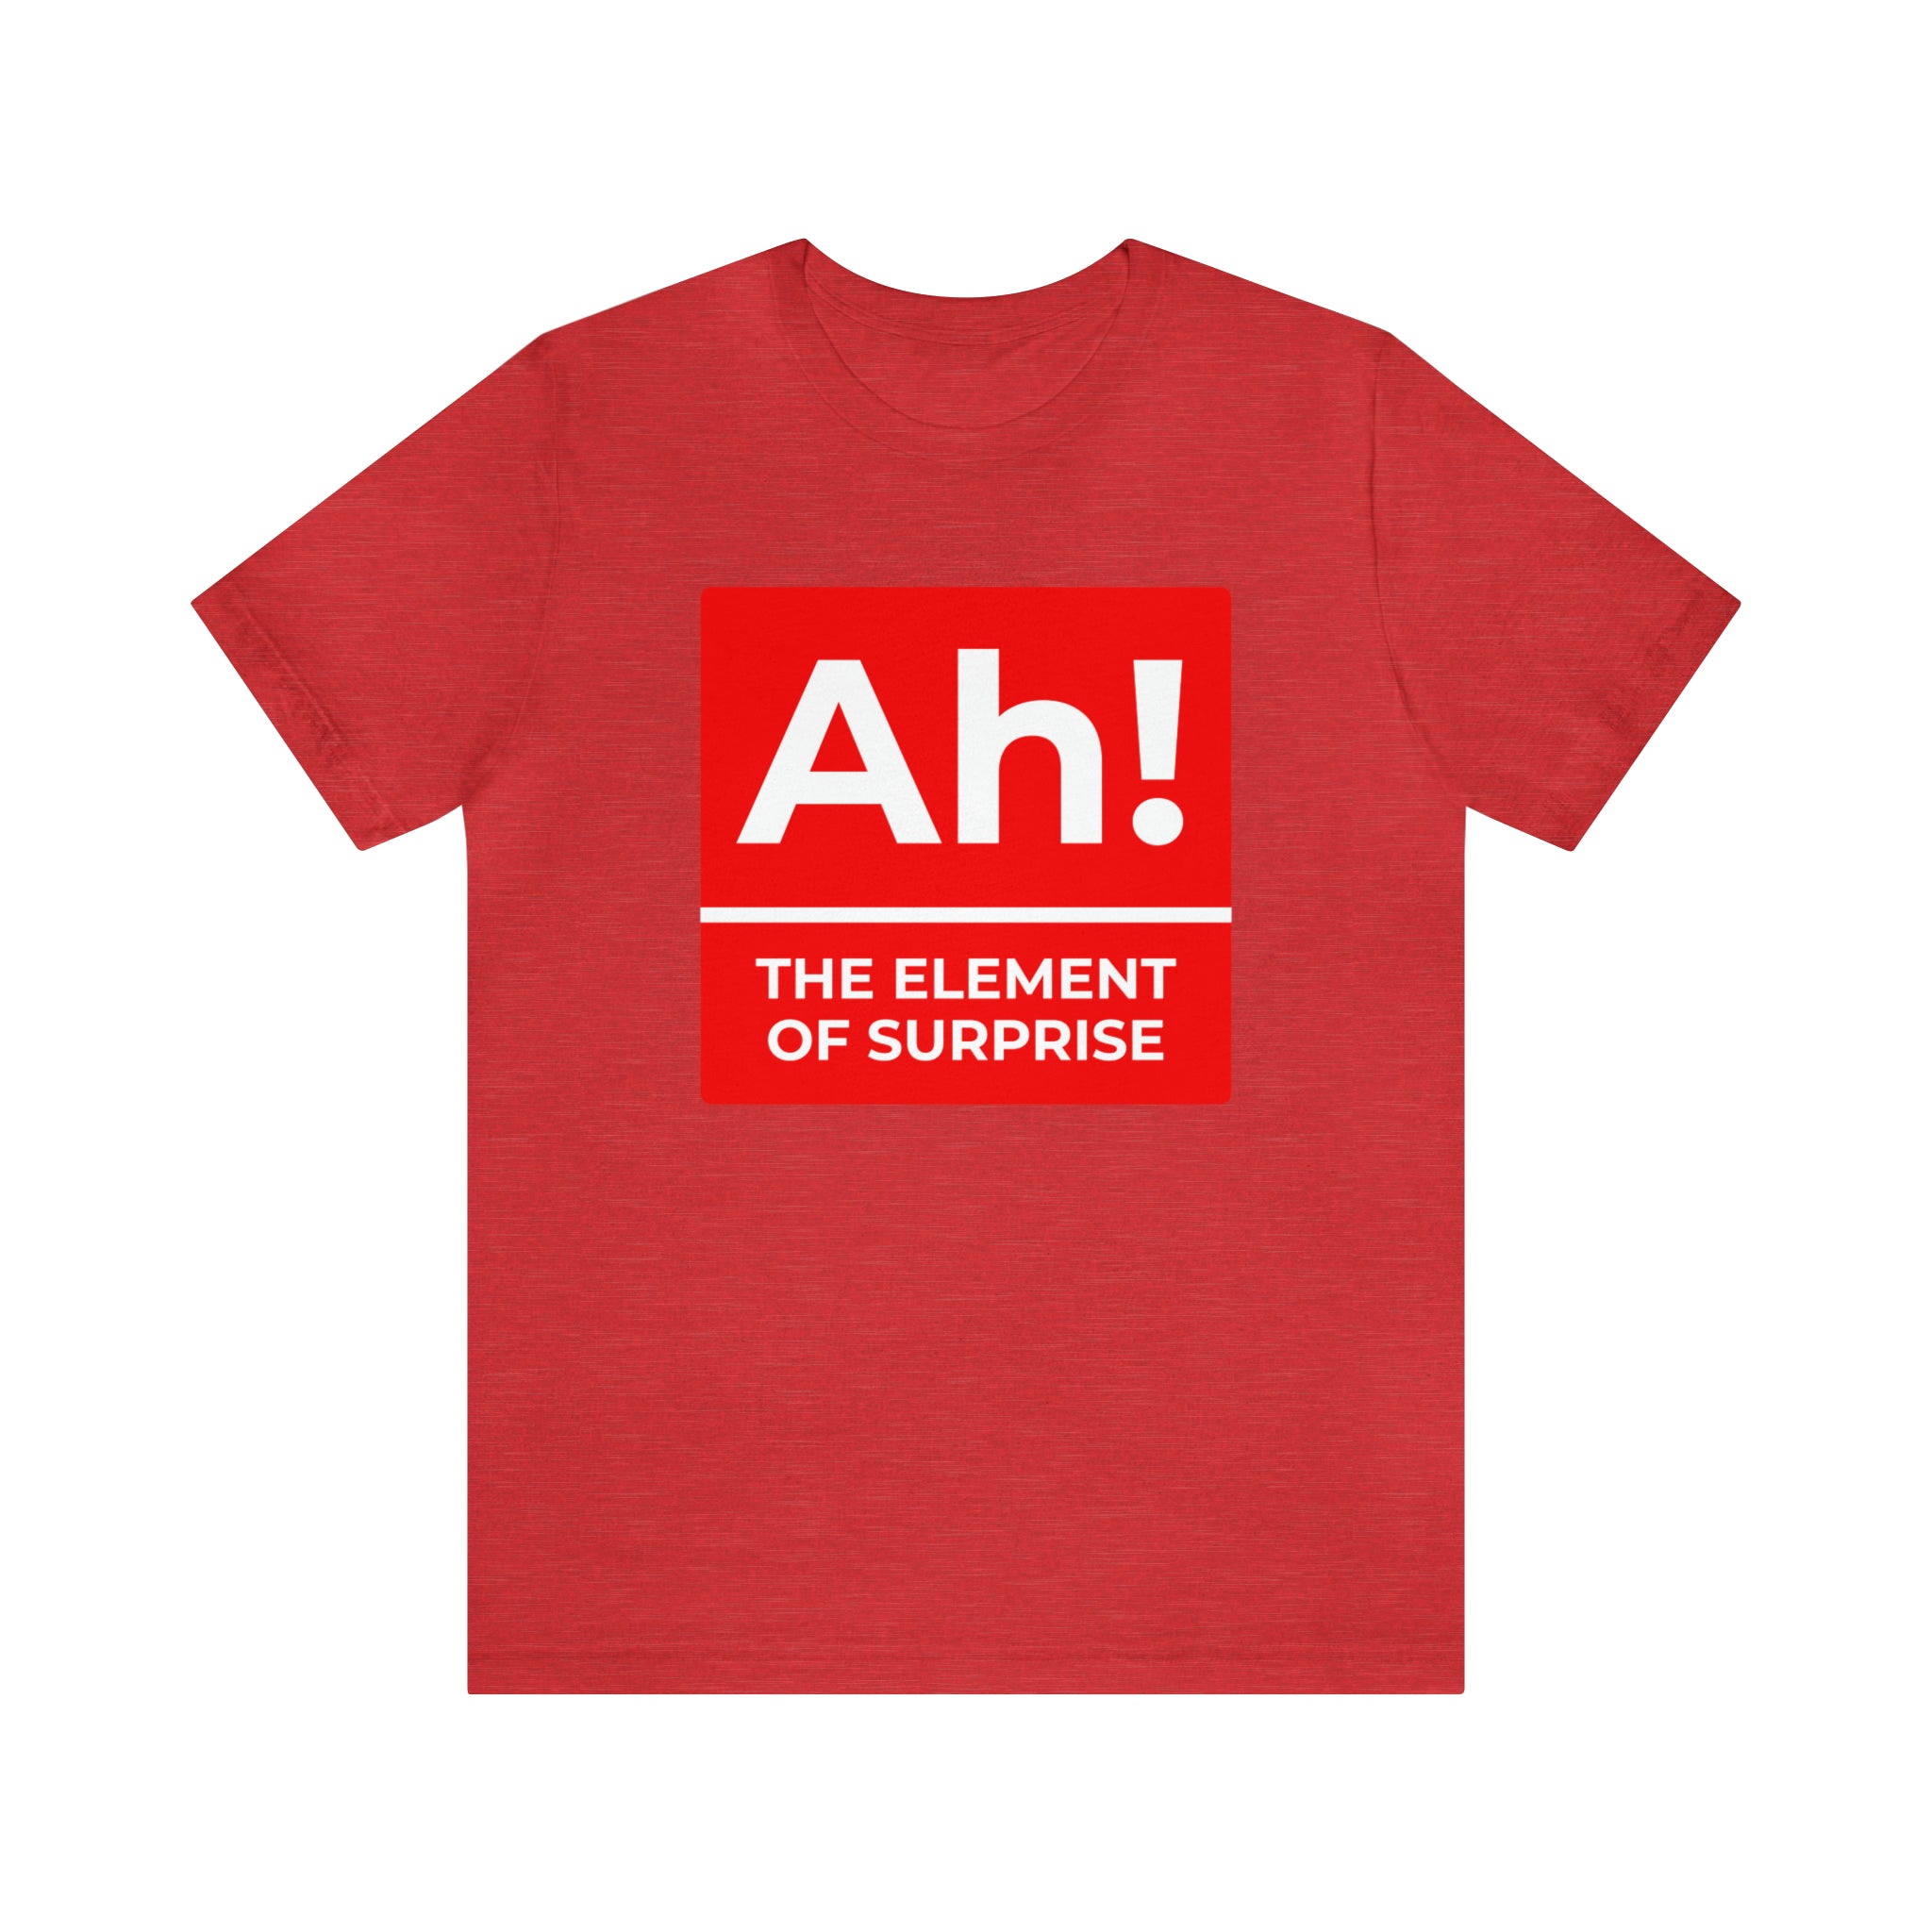 A red Ah! the Element of Surprise T-shirt.